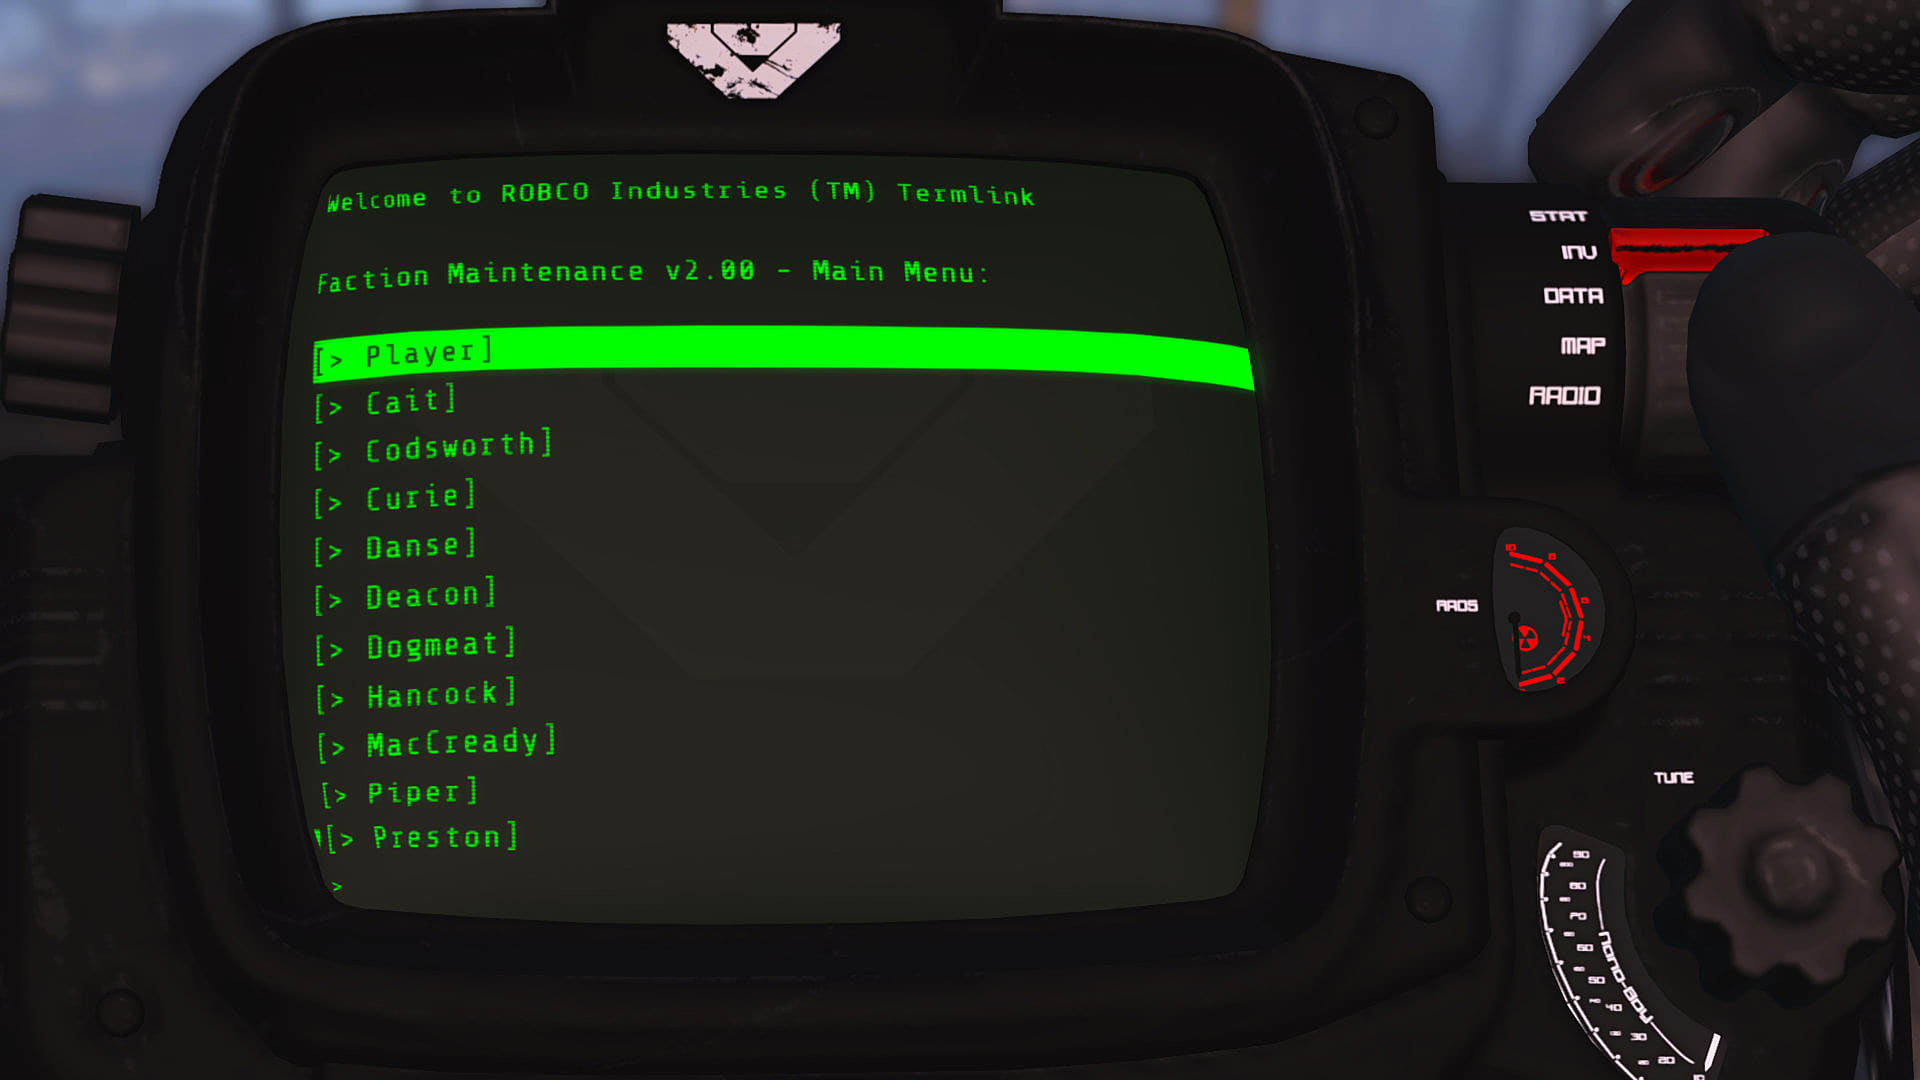 install fallout 3 mods